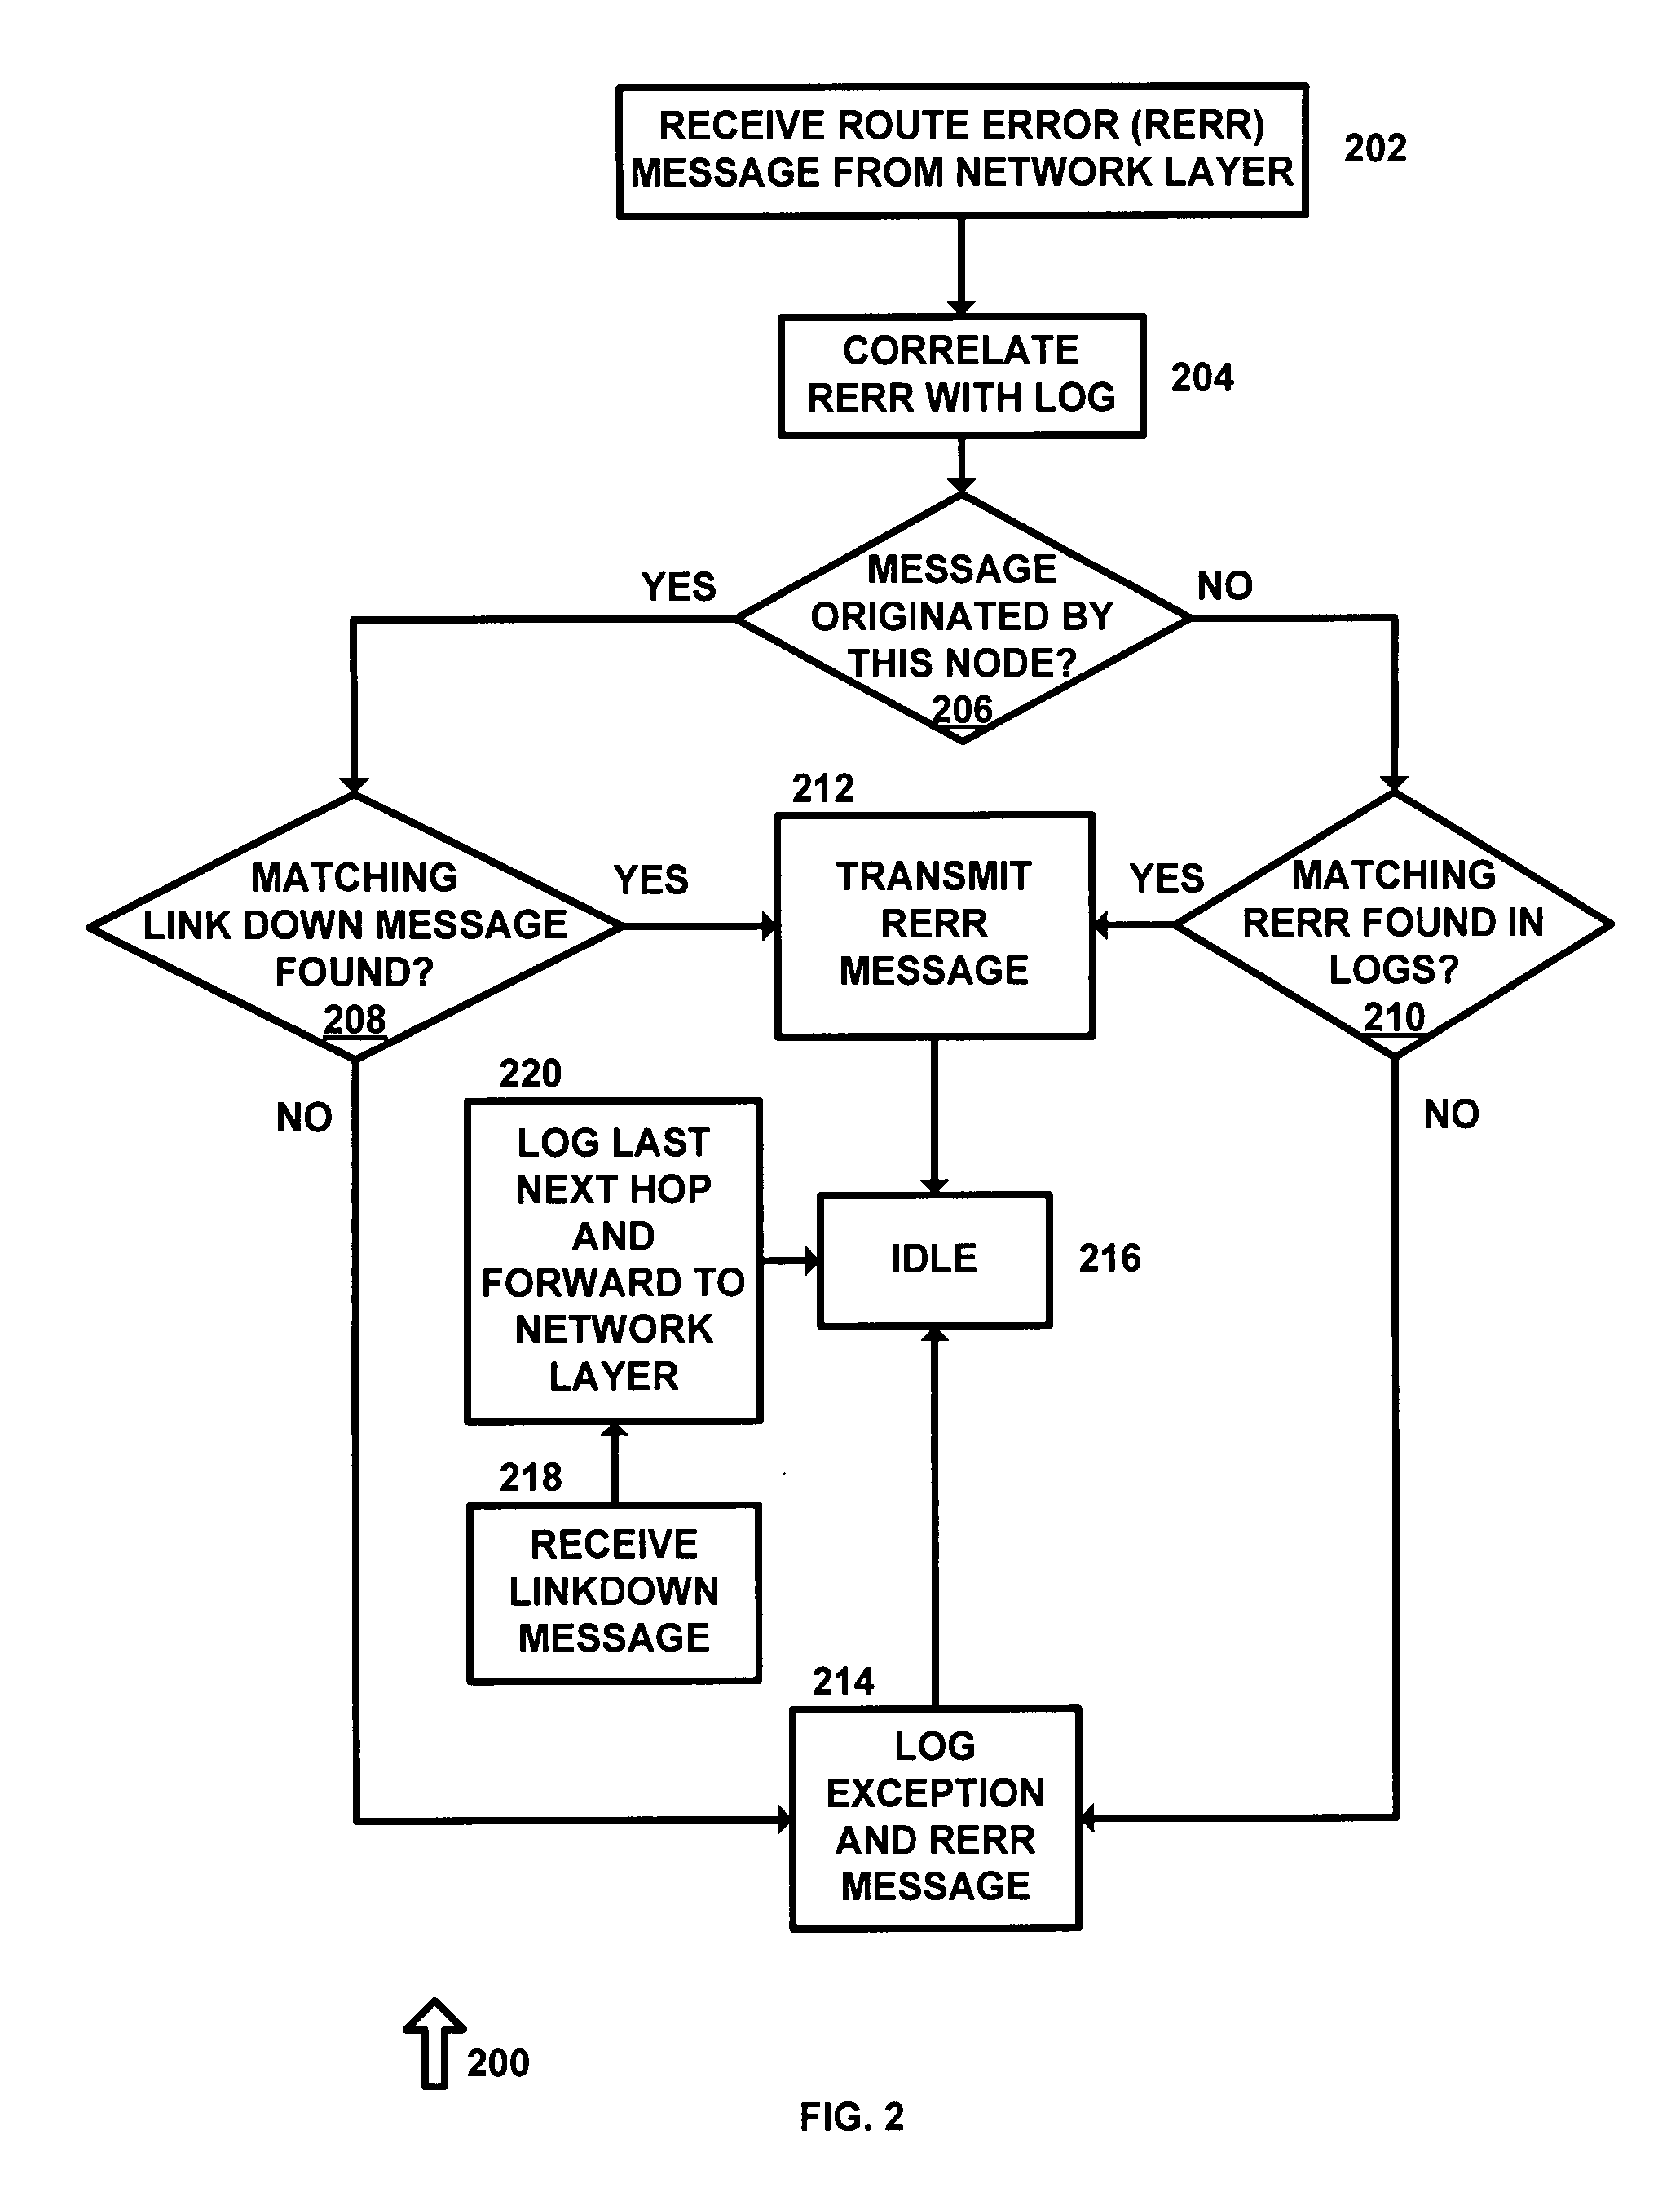 Tamper-resistant communication layer for attack mitigation and reliable intrusion detection